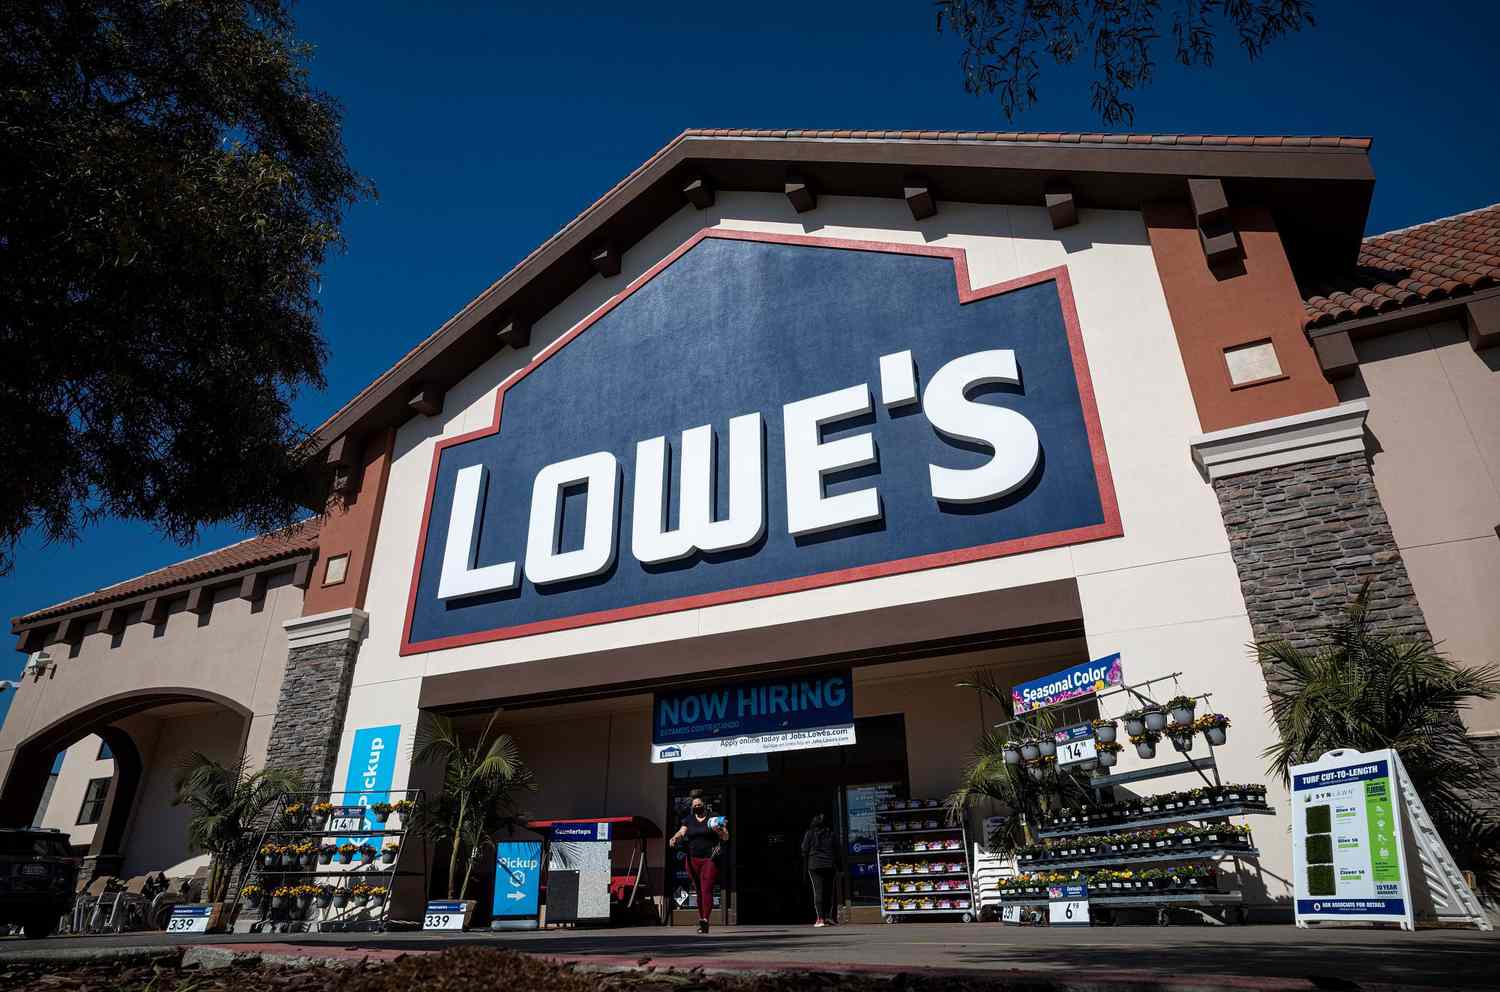 Lowe's Store Front